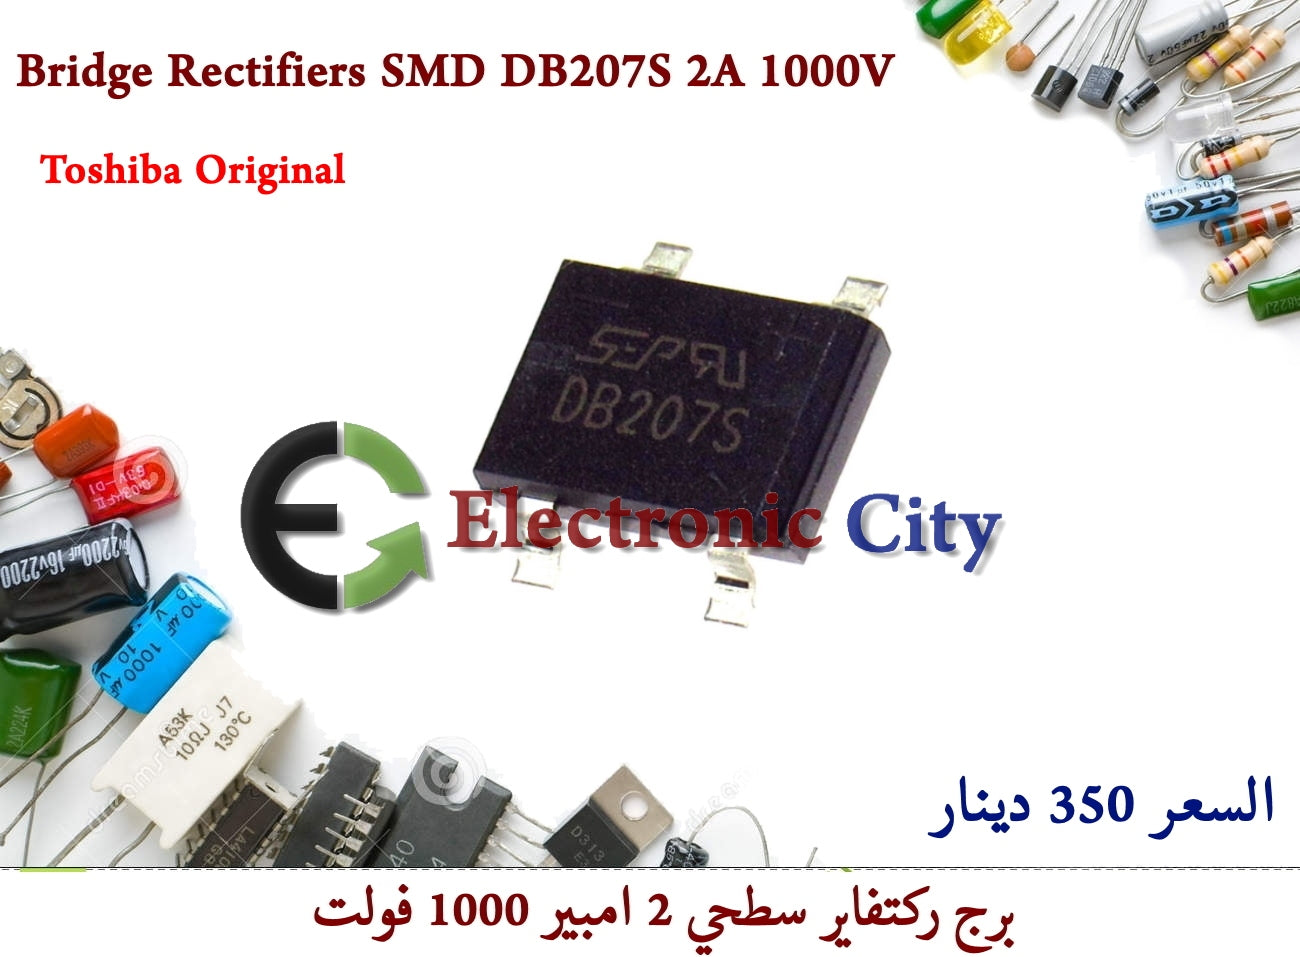 Bridge Rectifiers SMD DB207S 2A 1000V